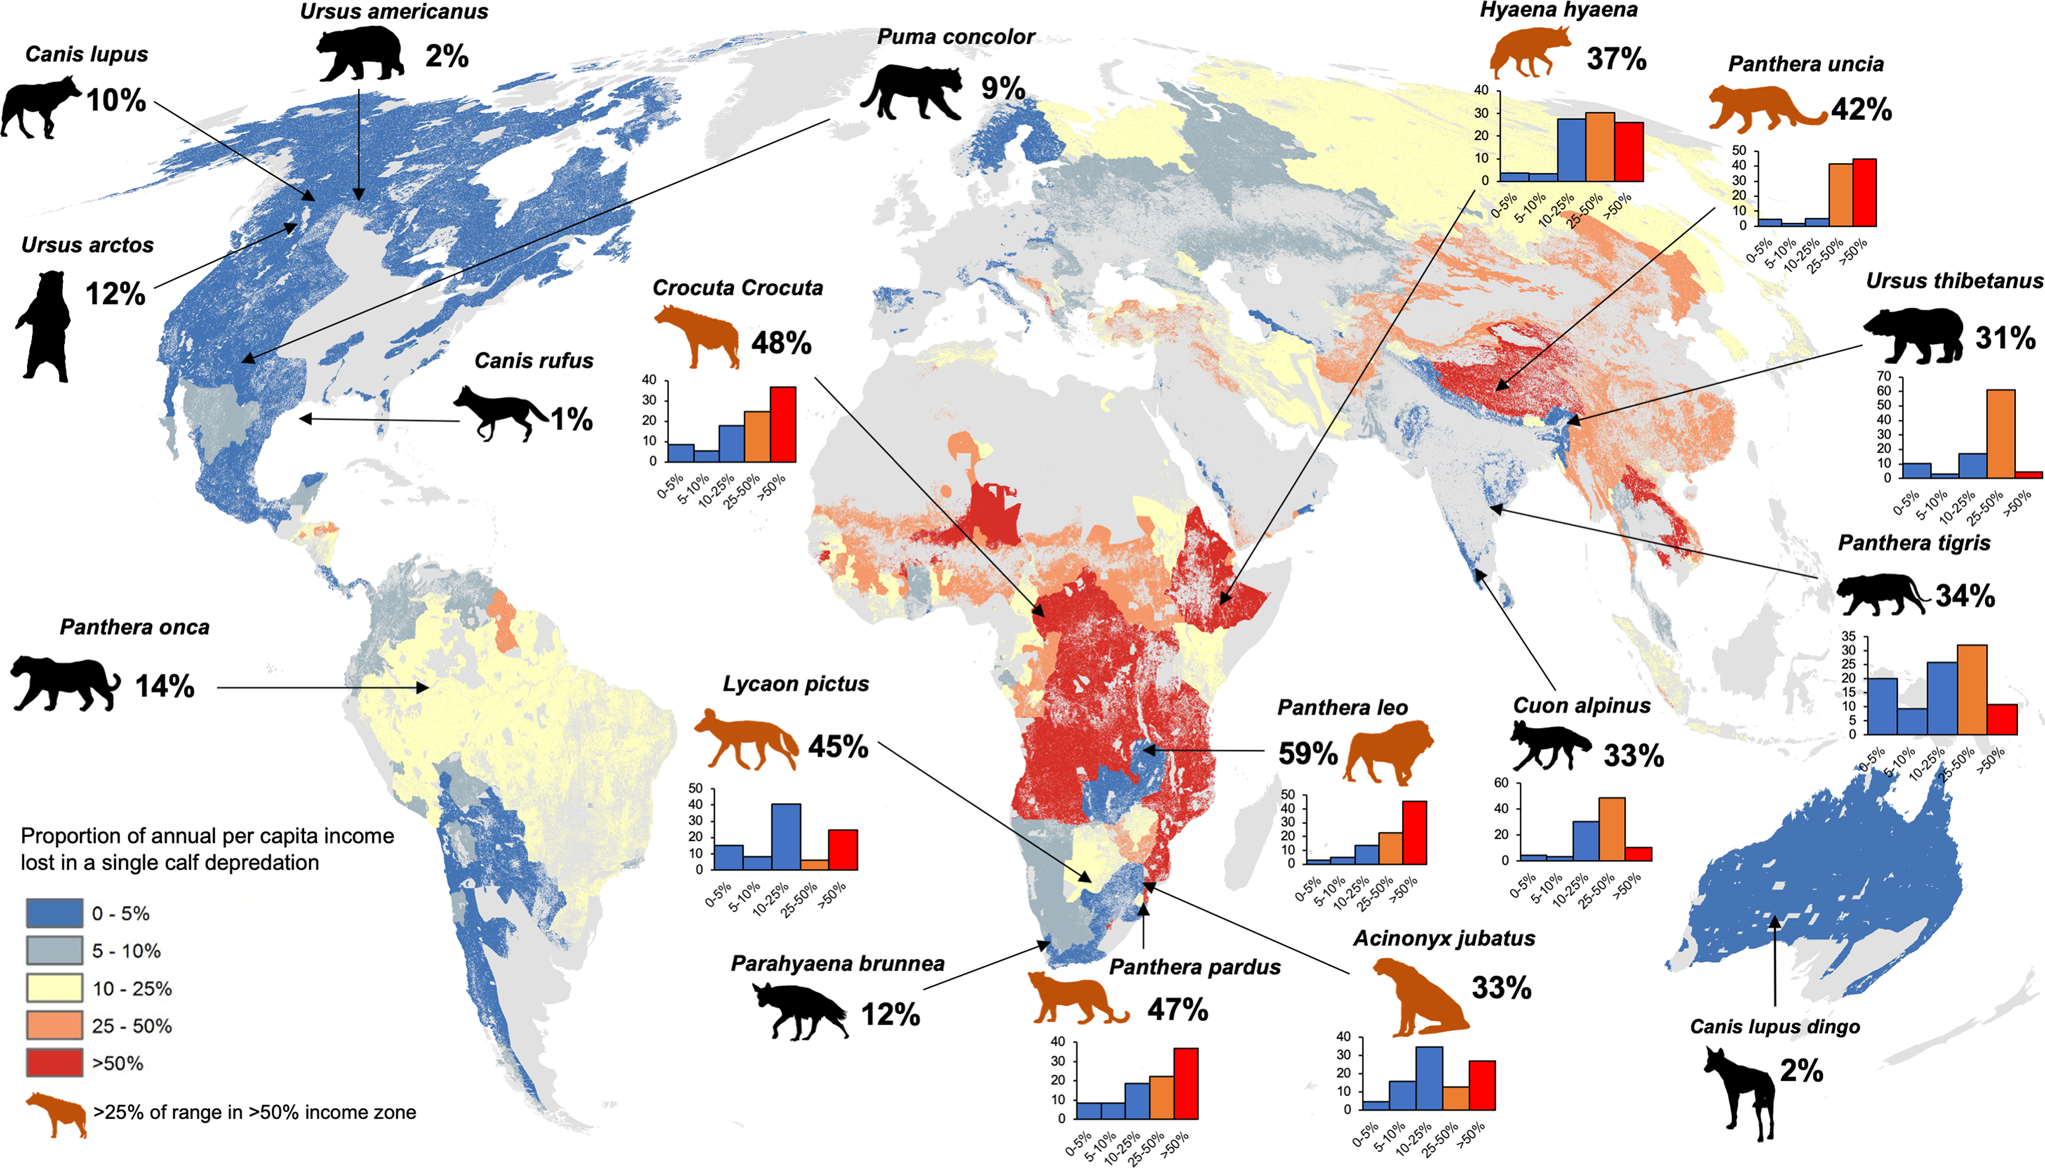 V. Role of Technology in Addressing Human-Wildlife Conflict in Agriculture